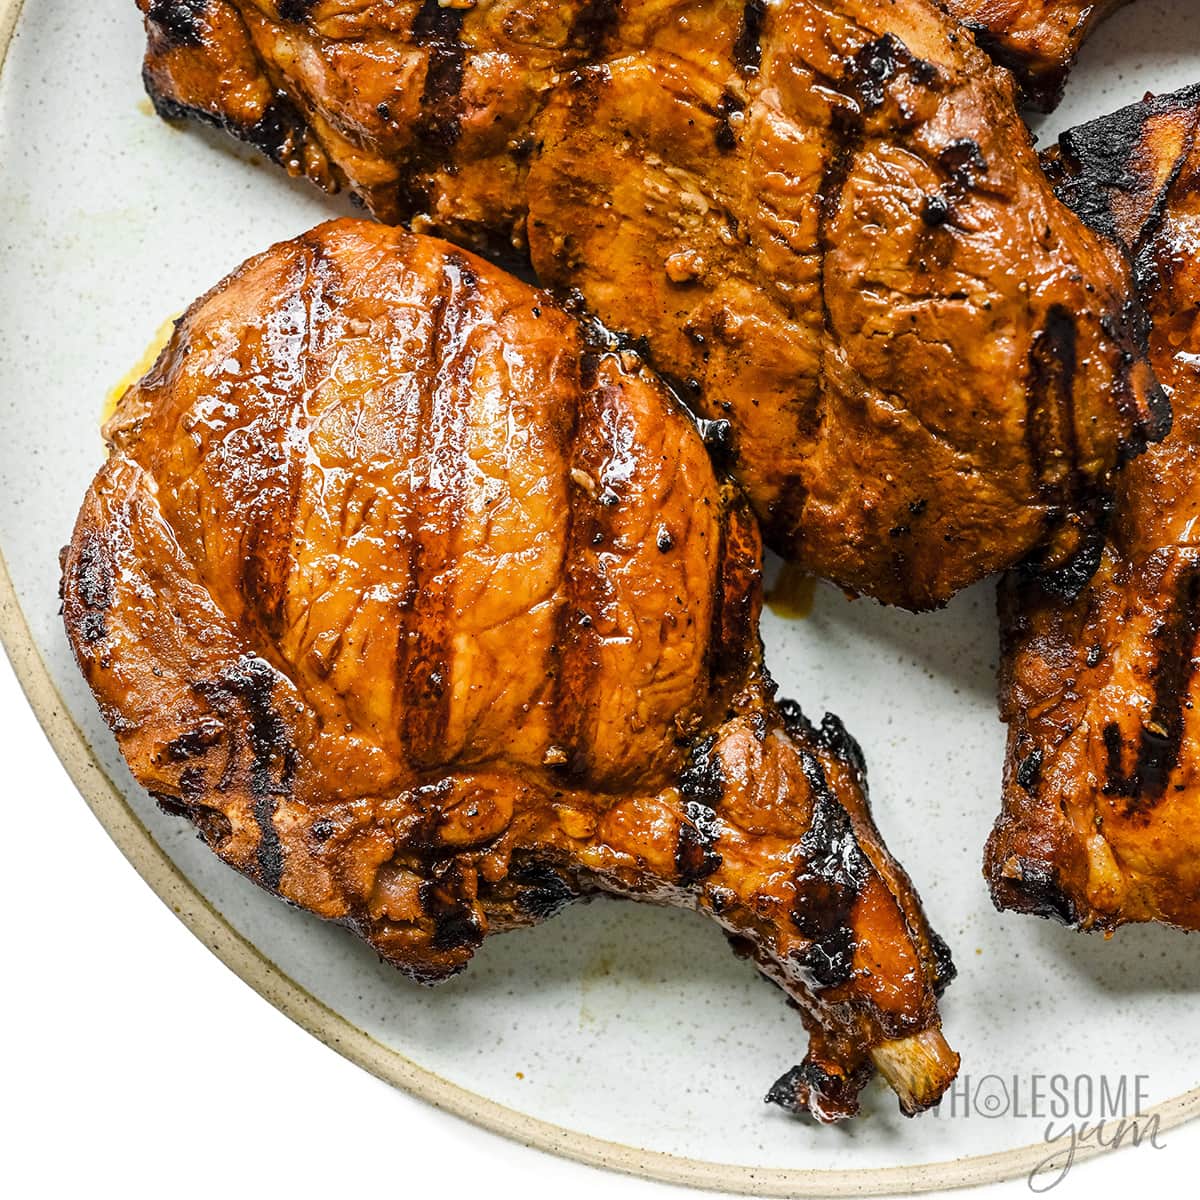 Grilled pork chops resting on a plate.